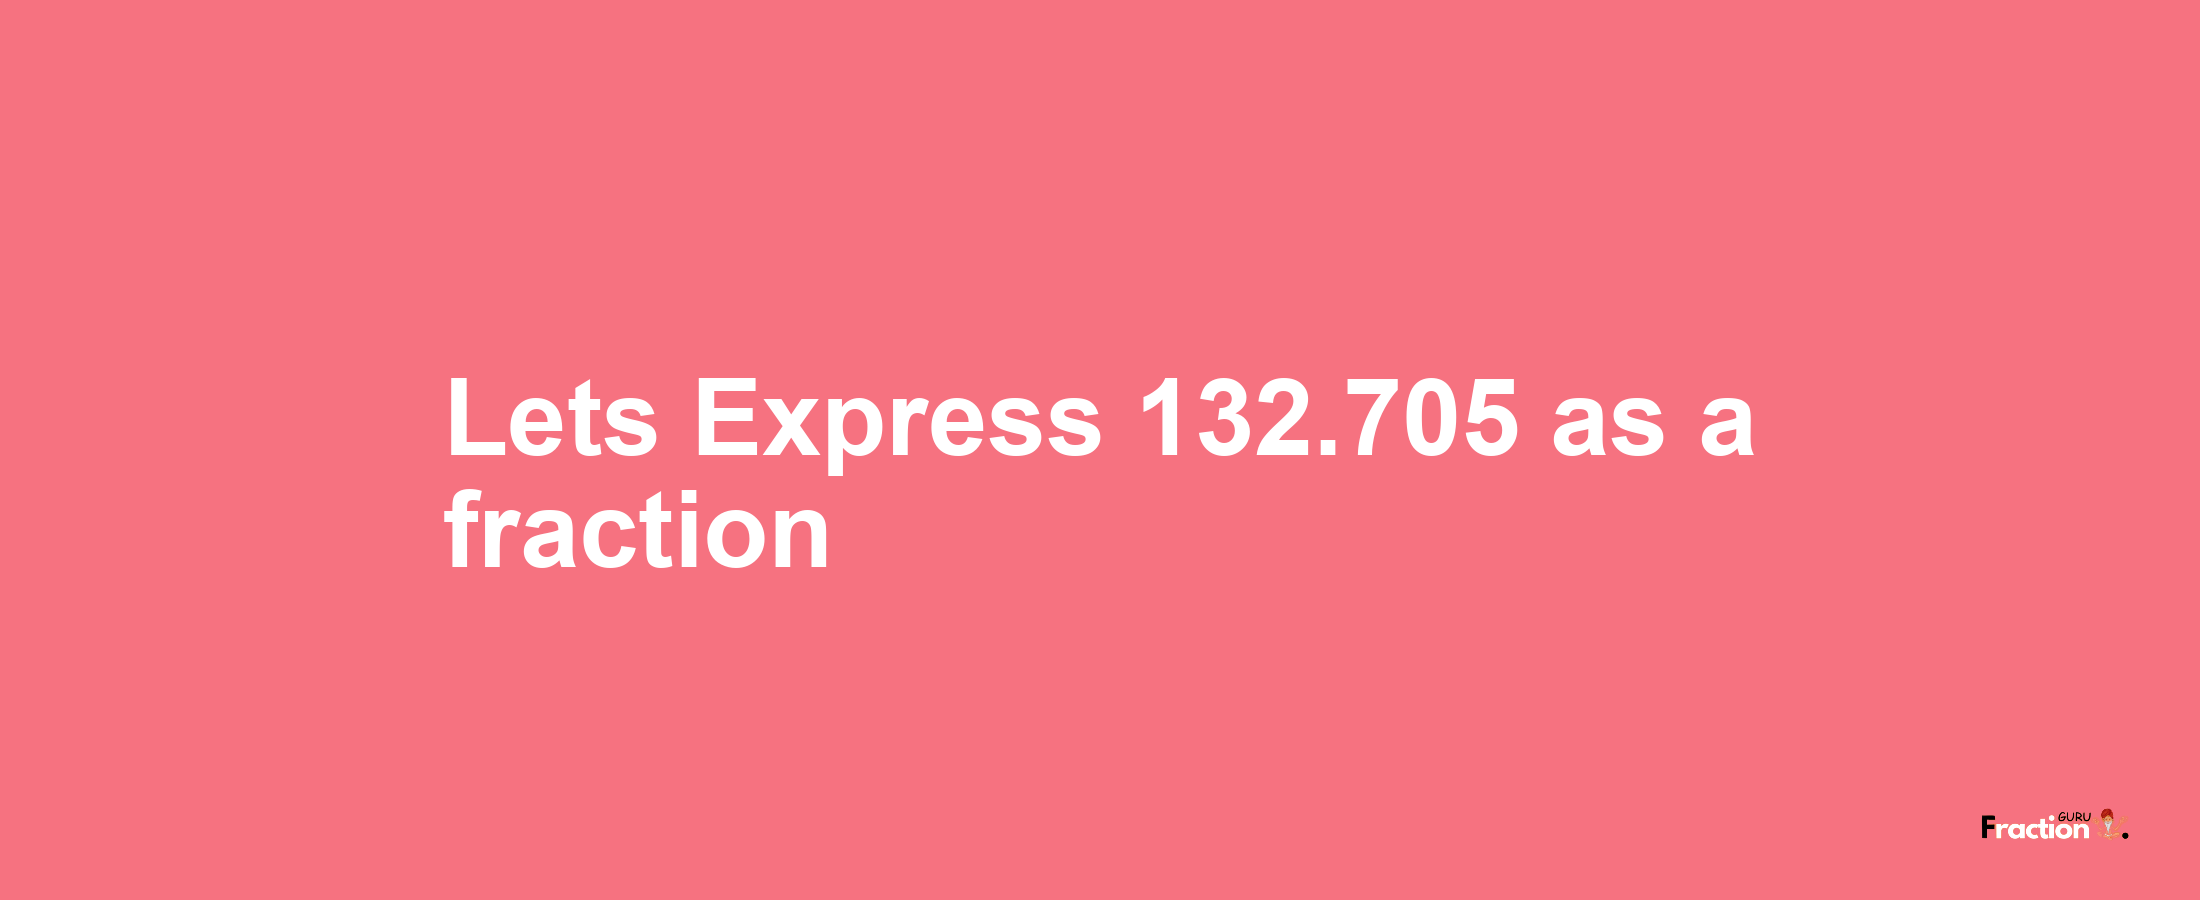 Lets Express 132.705 as afraction